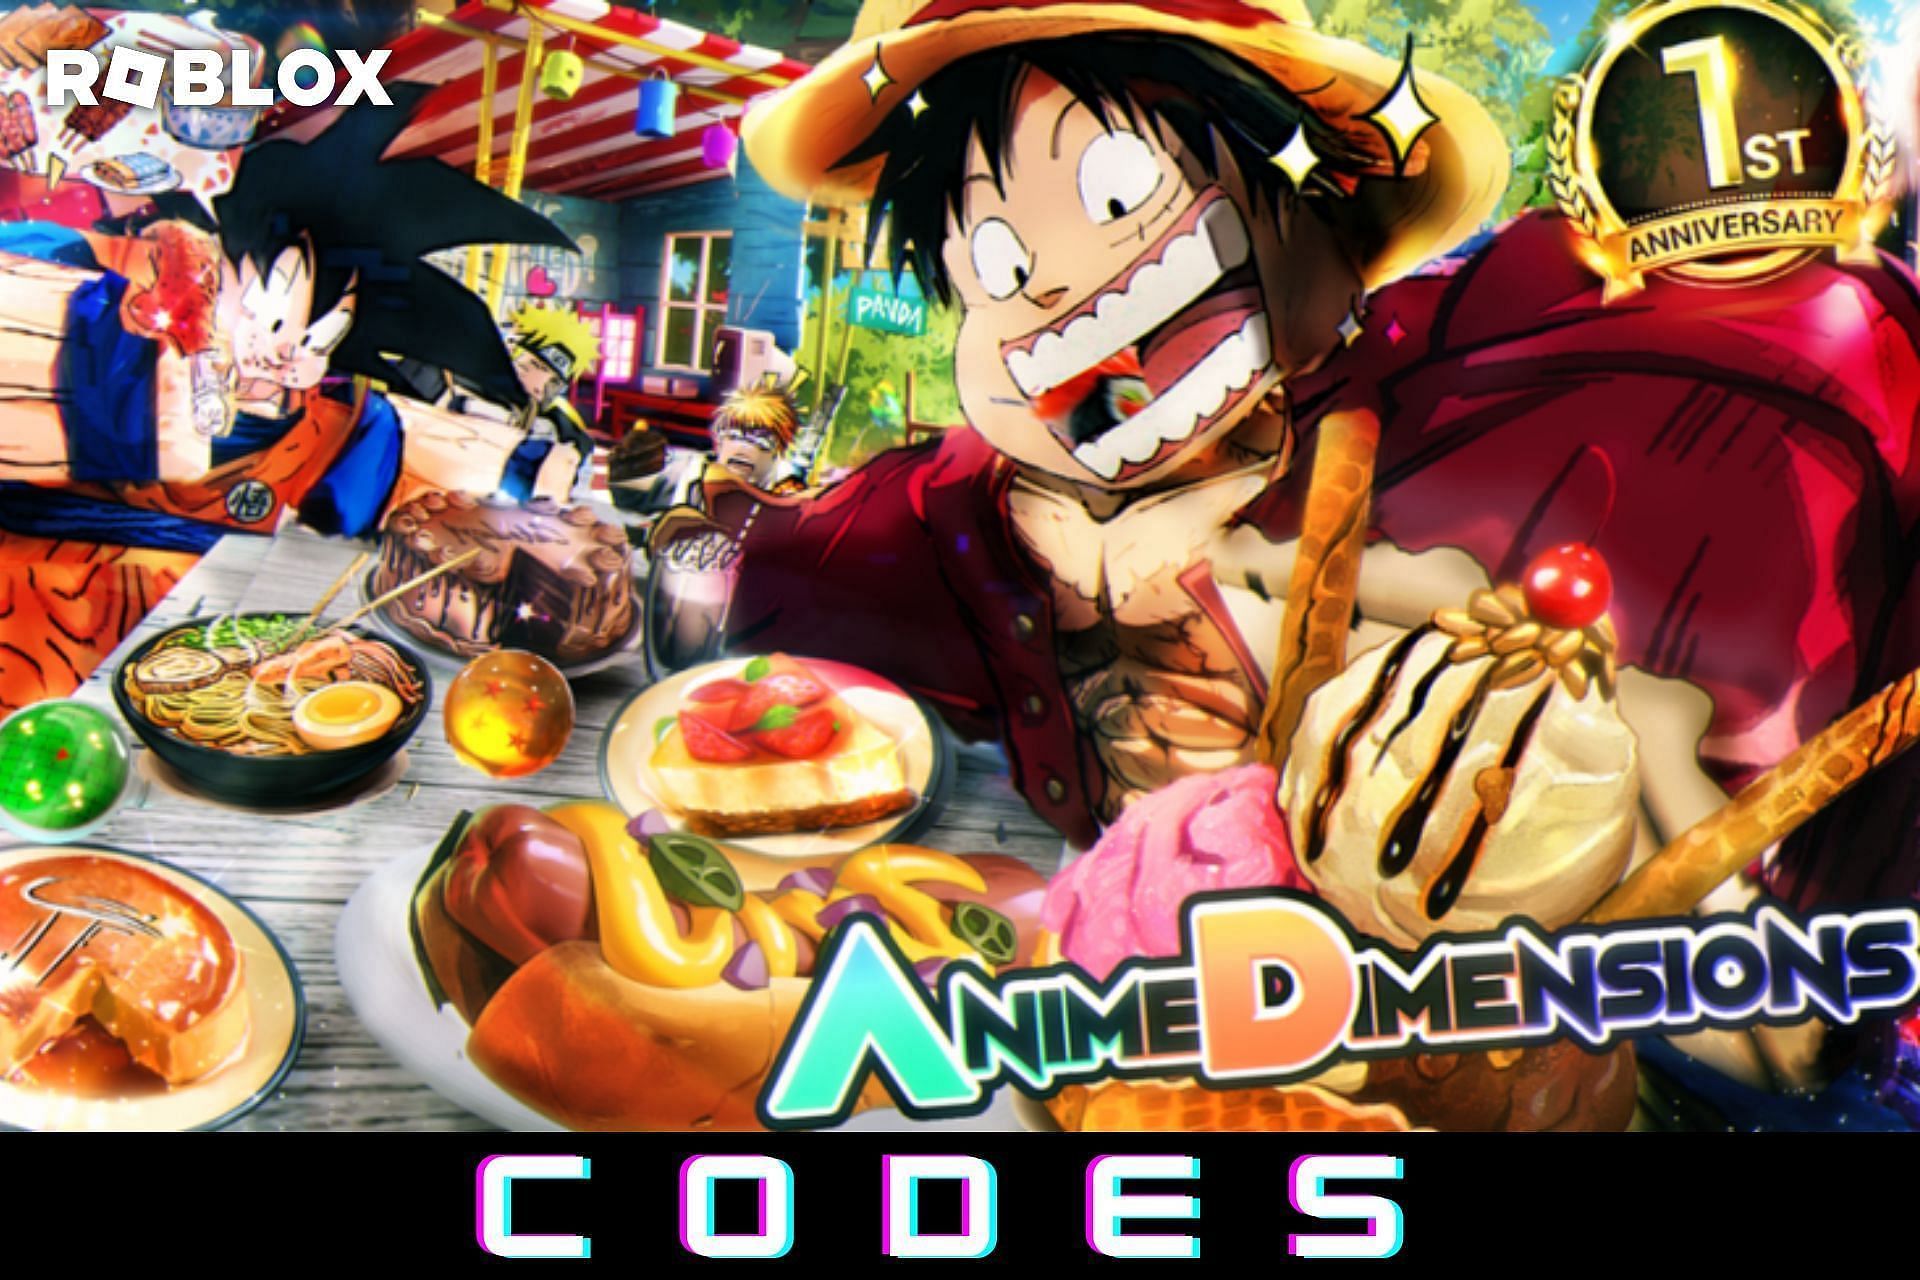 Roblox: Anime Dimensions Codes for August 2022